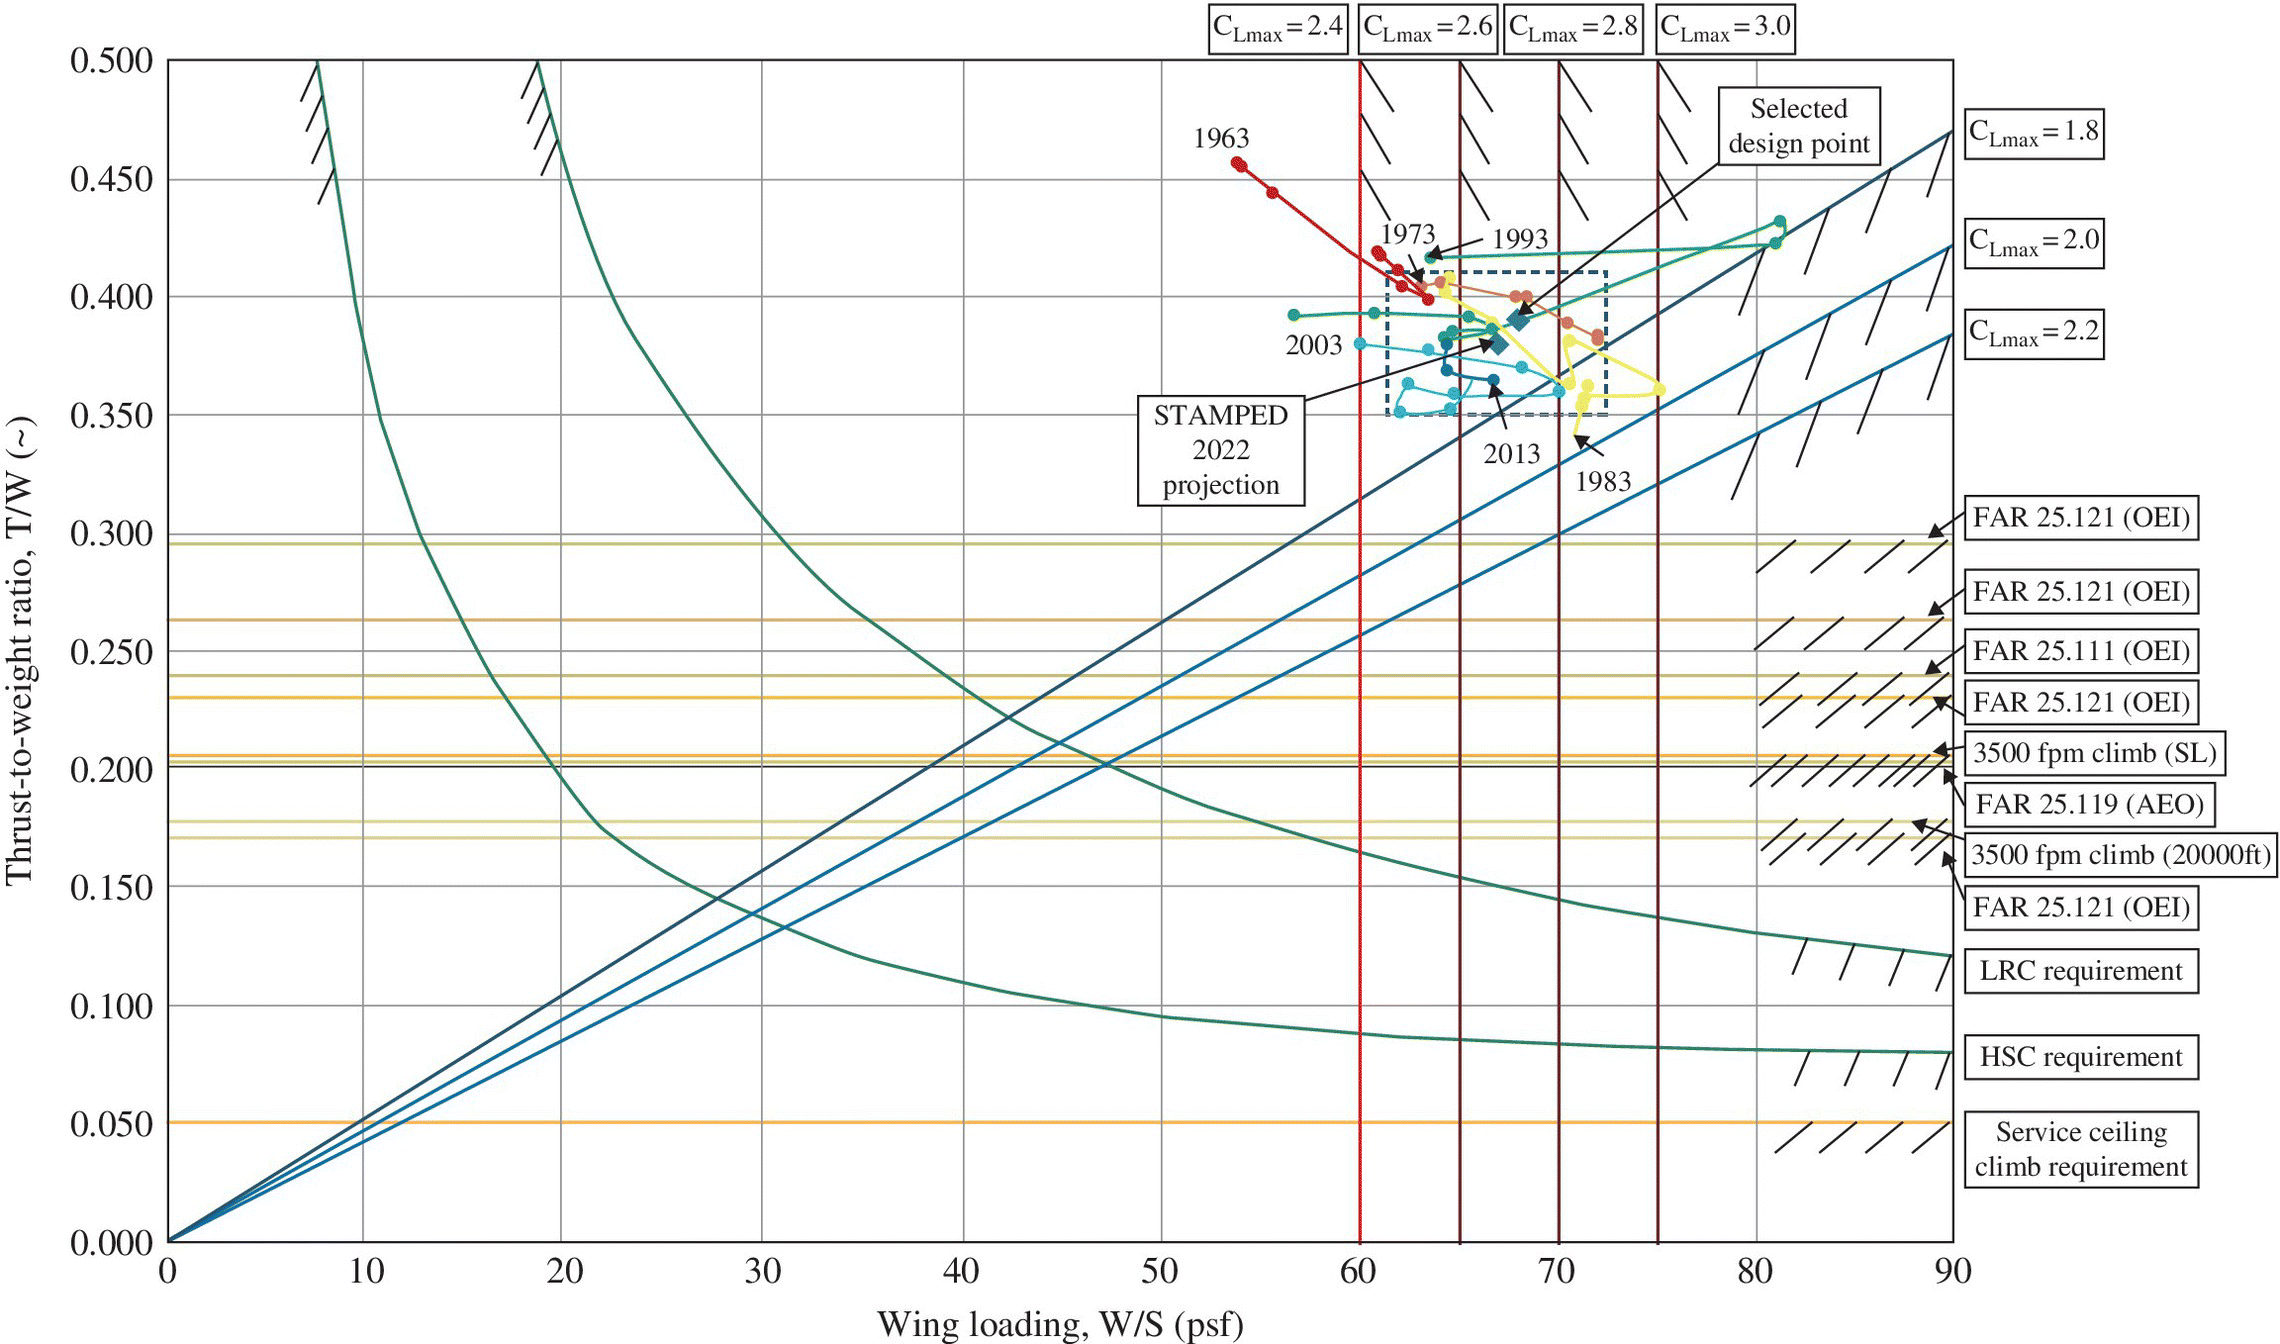 Graph illustrating sizing chart for a high‐speed aircraft displaying 3 ascending line plots for CLmax=1.8, CLmax=2.0, and CLmax=2.2 with arrows depicting selected design point, stamped 2022 projection, etc.